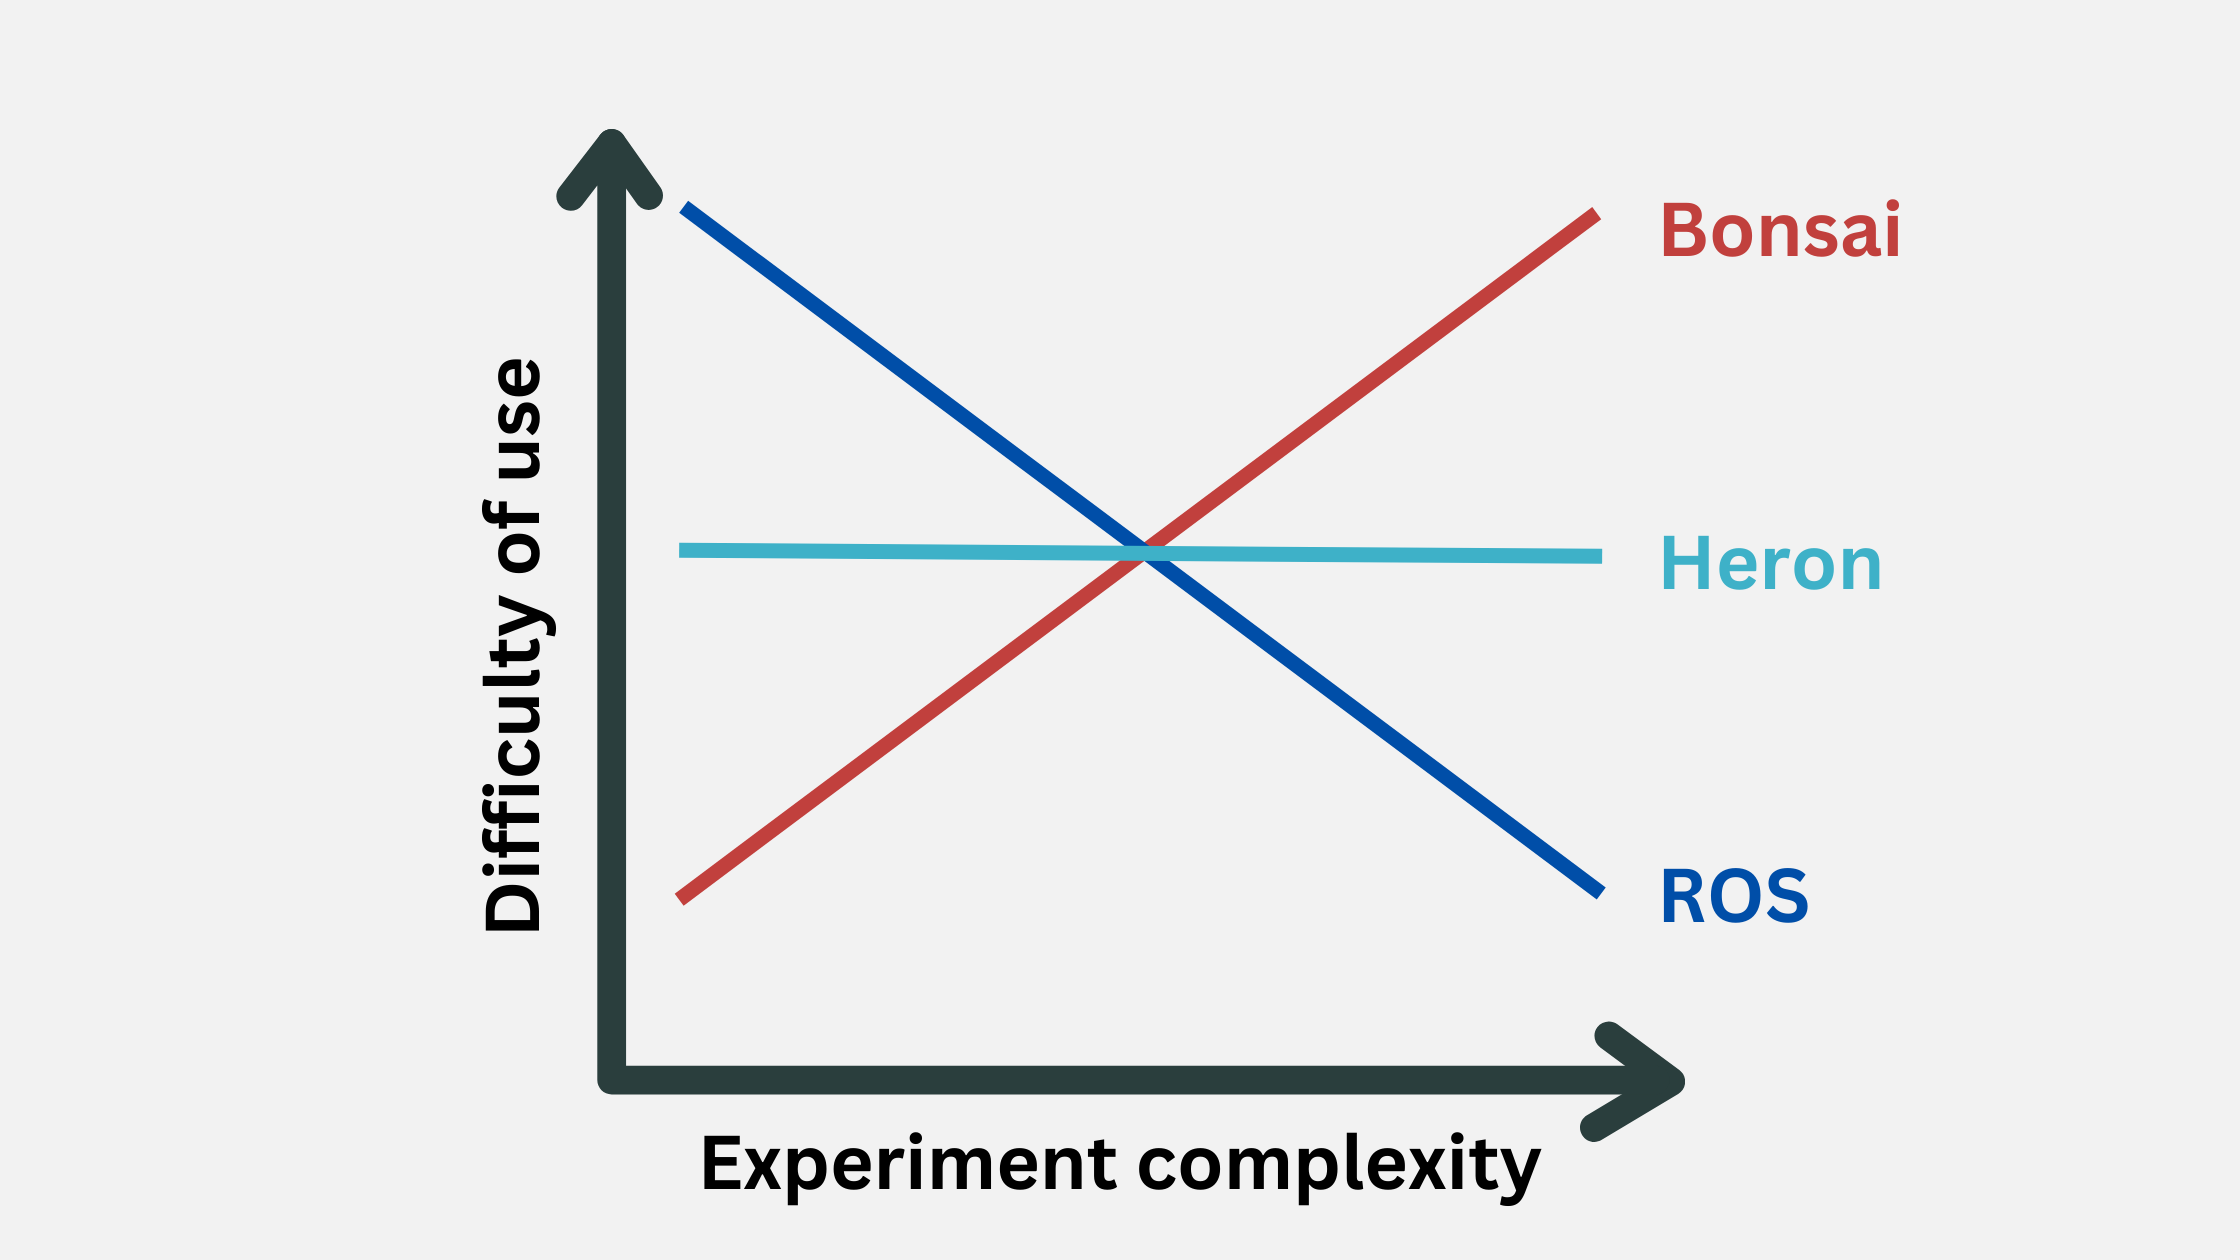 Line graph showing difficulty of use as experiment complexity increases for Bonsai, ROS and Heron